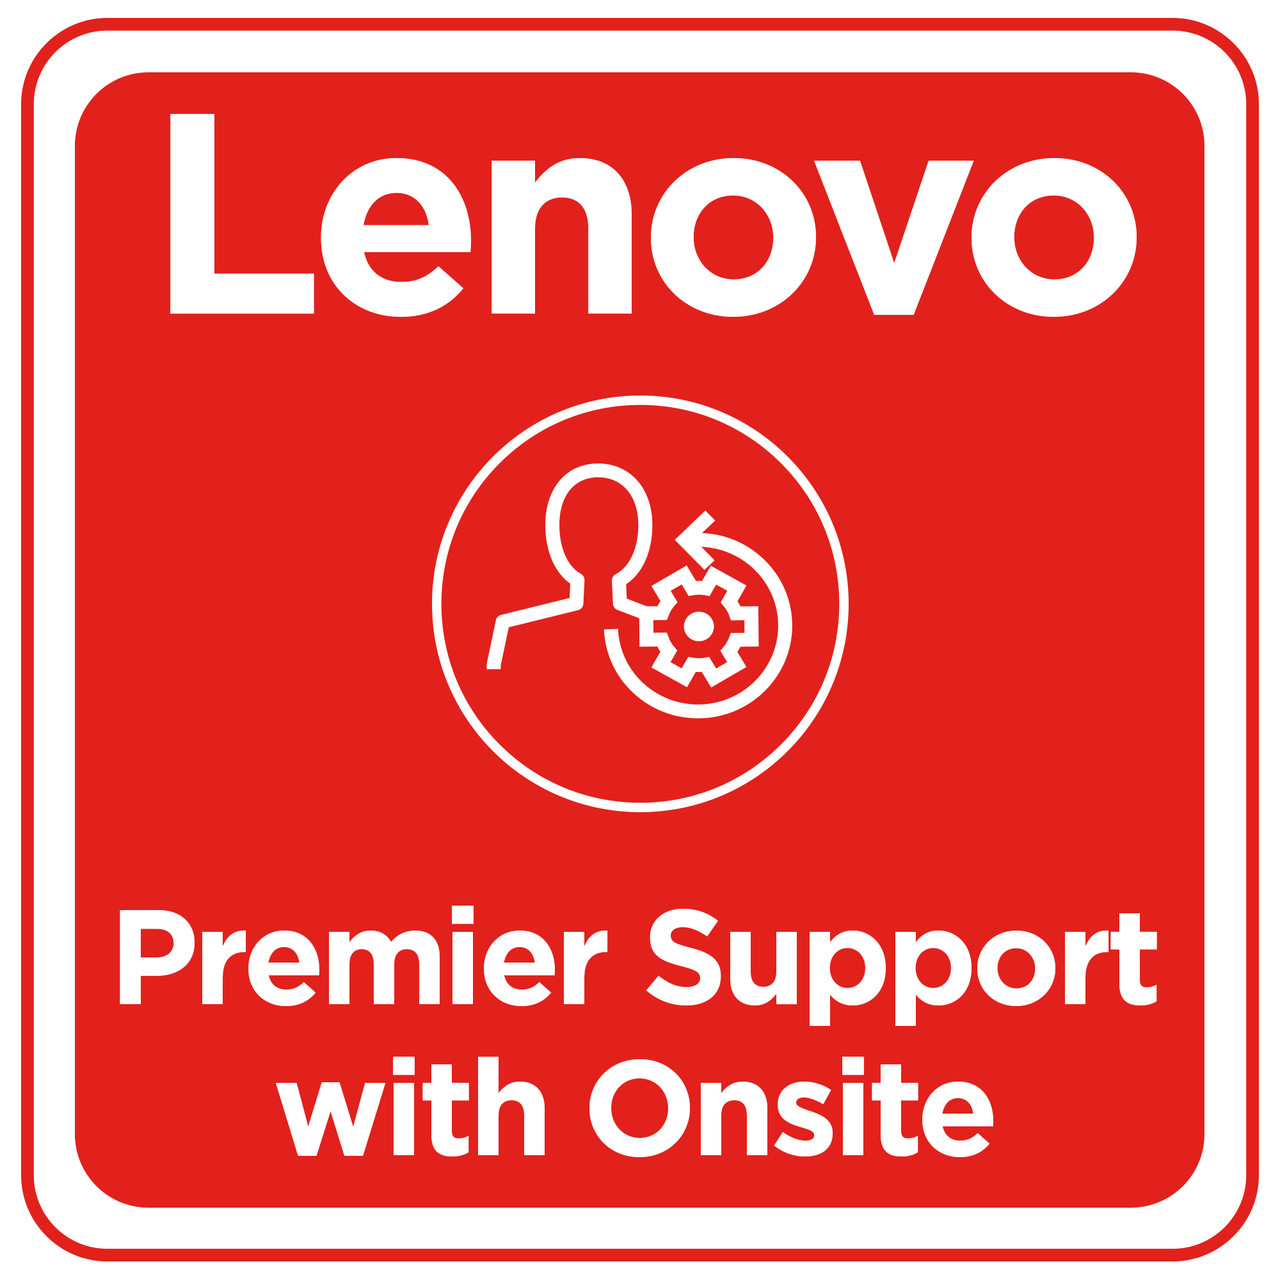 Lenovo Premier Support with Onsite NBD, Extended service agreement, parts and labour, 2 years, on-site, response time: NBD, for ThinkCentre M90; M90a Gen 2; M90a Gen 3; M90a Pro Gen 3; M910; M920z AIO; M93; X1